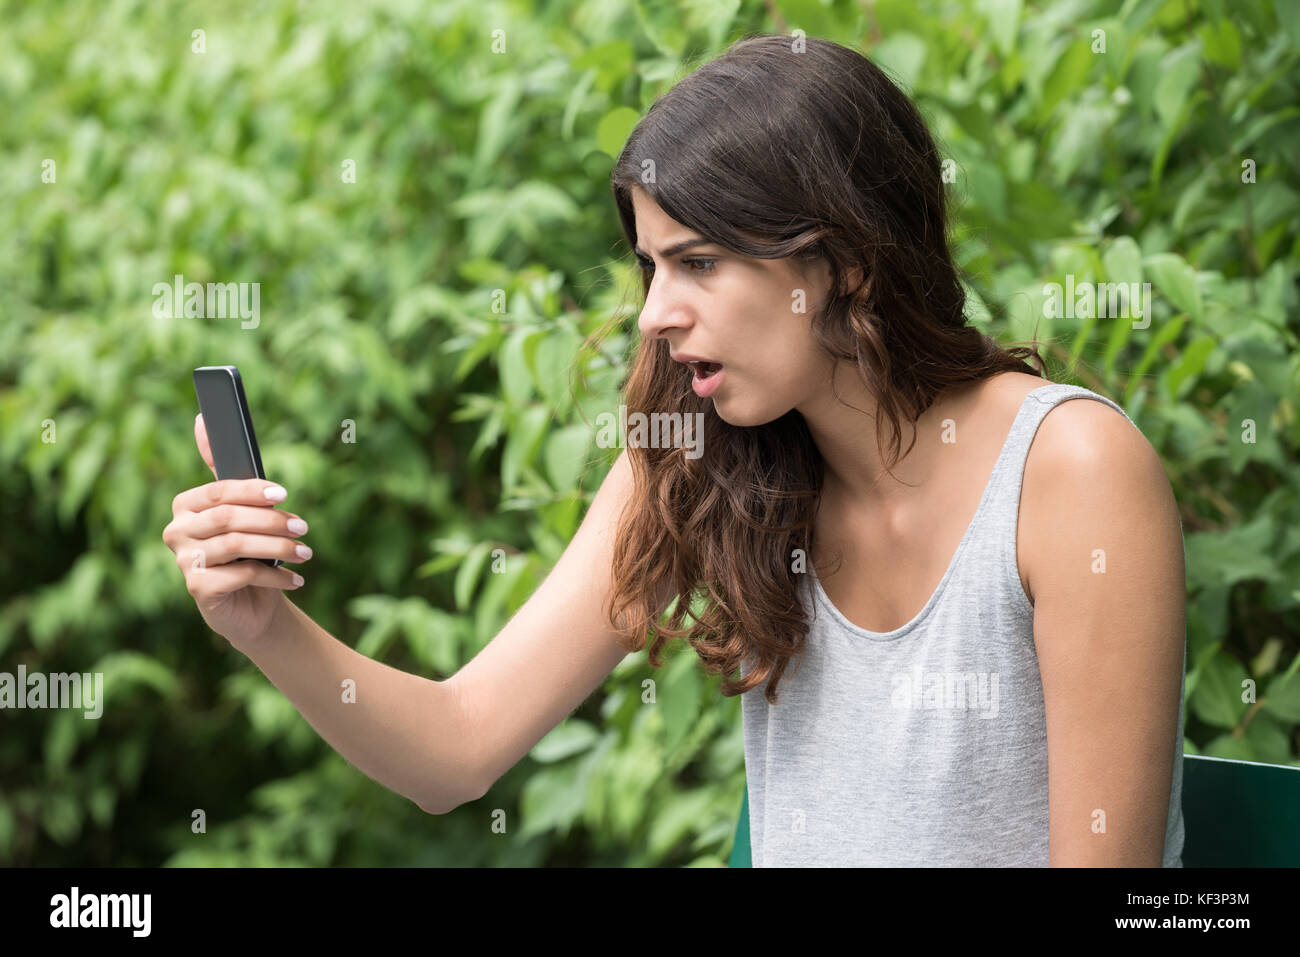 Close-up Of Frustrated Young Woman Looking At Mobile Phone Stock Photo